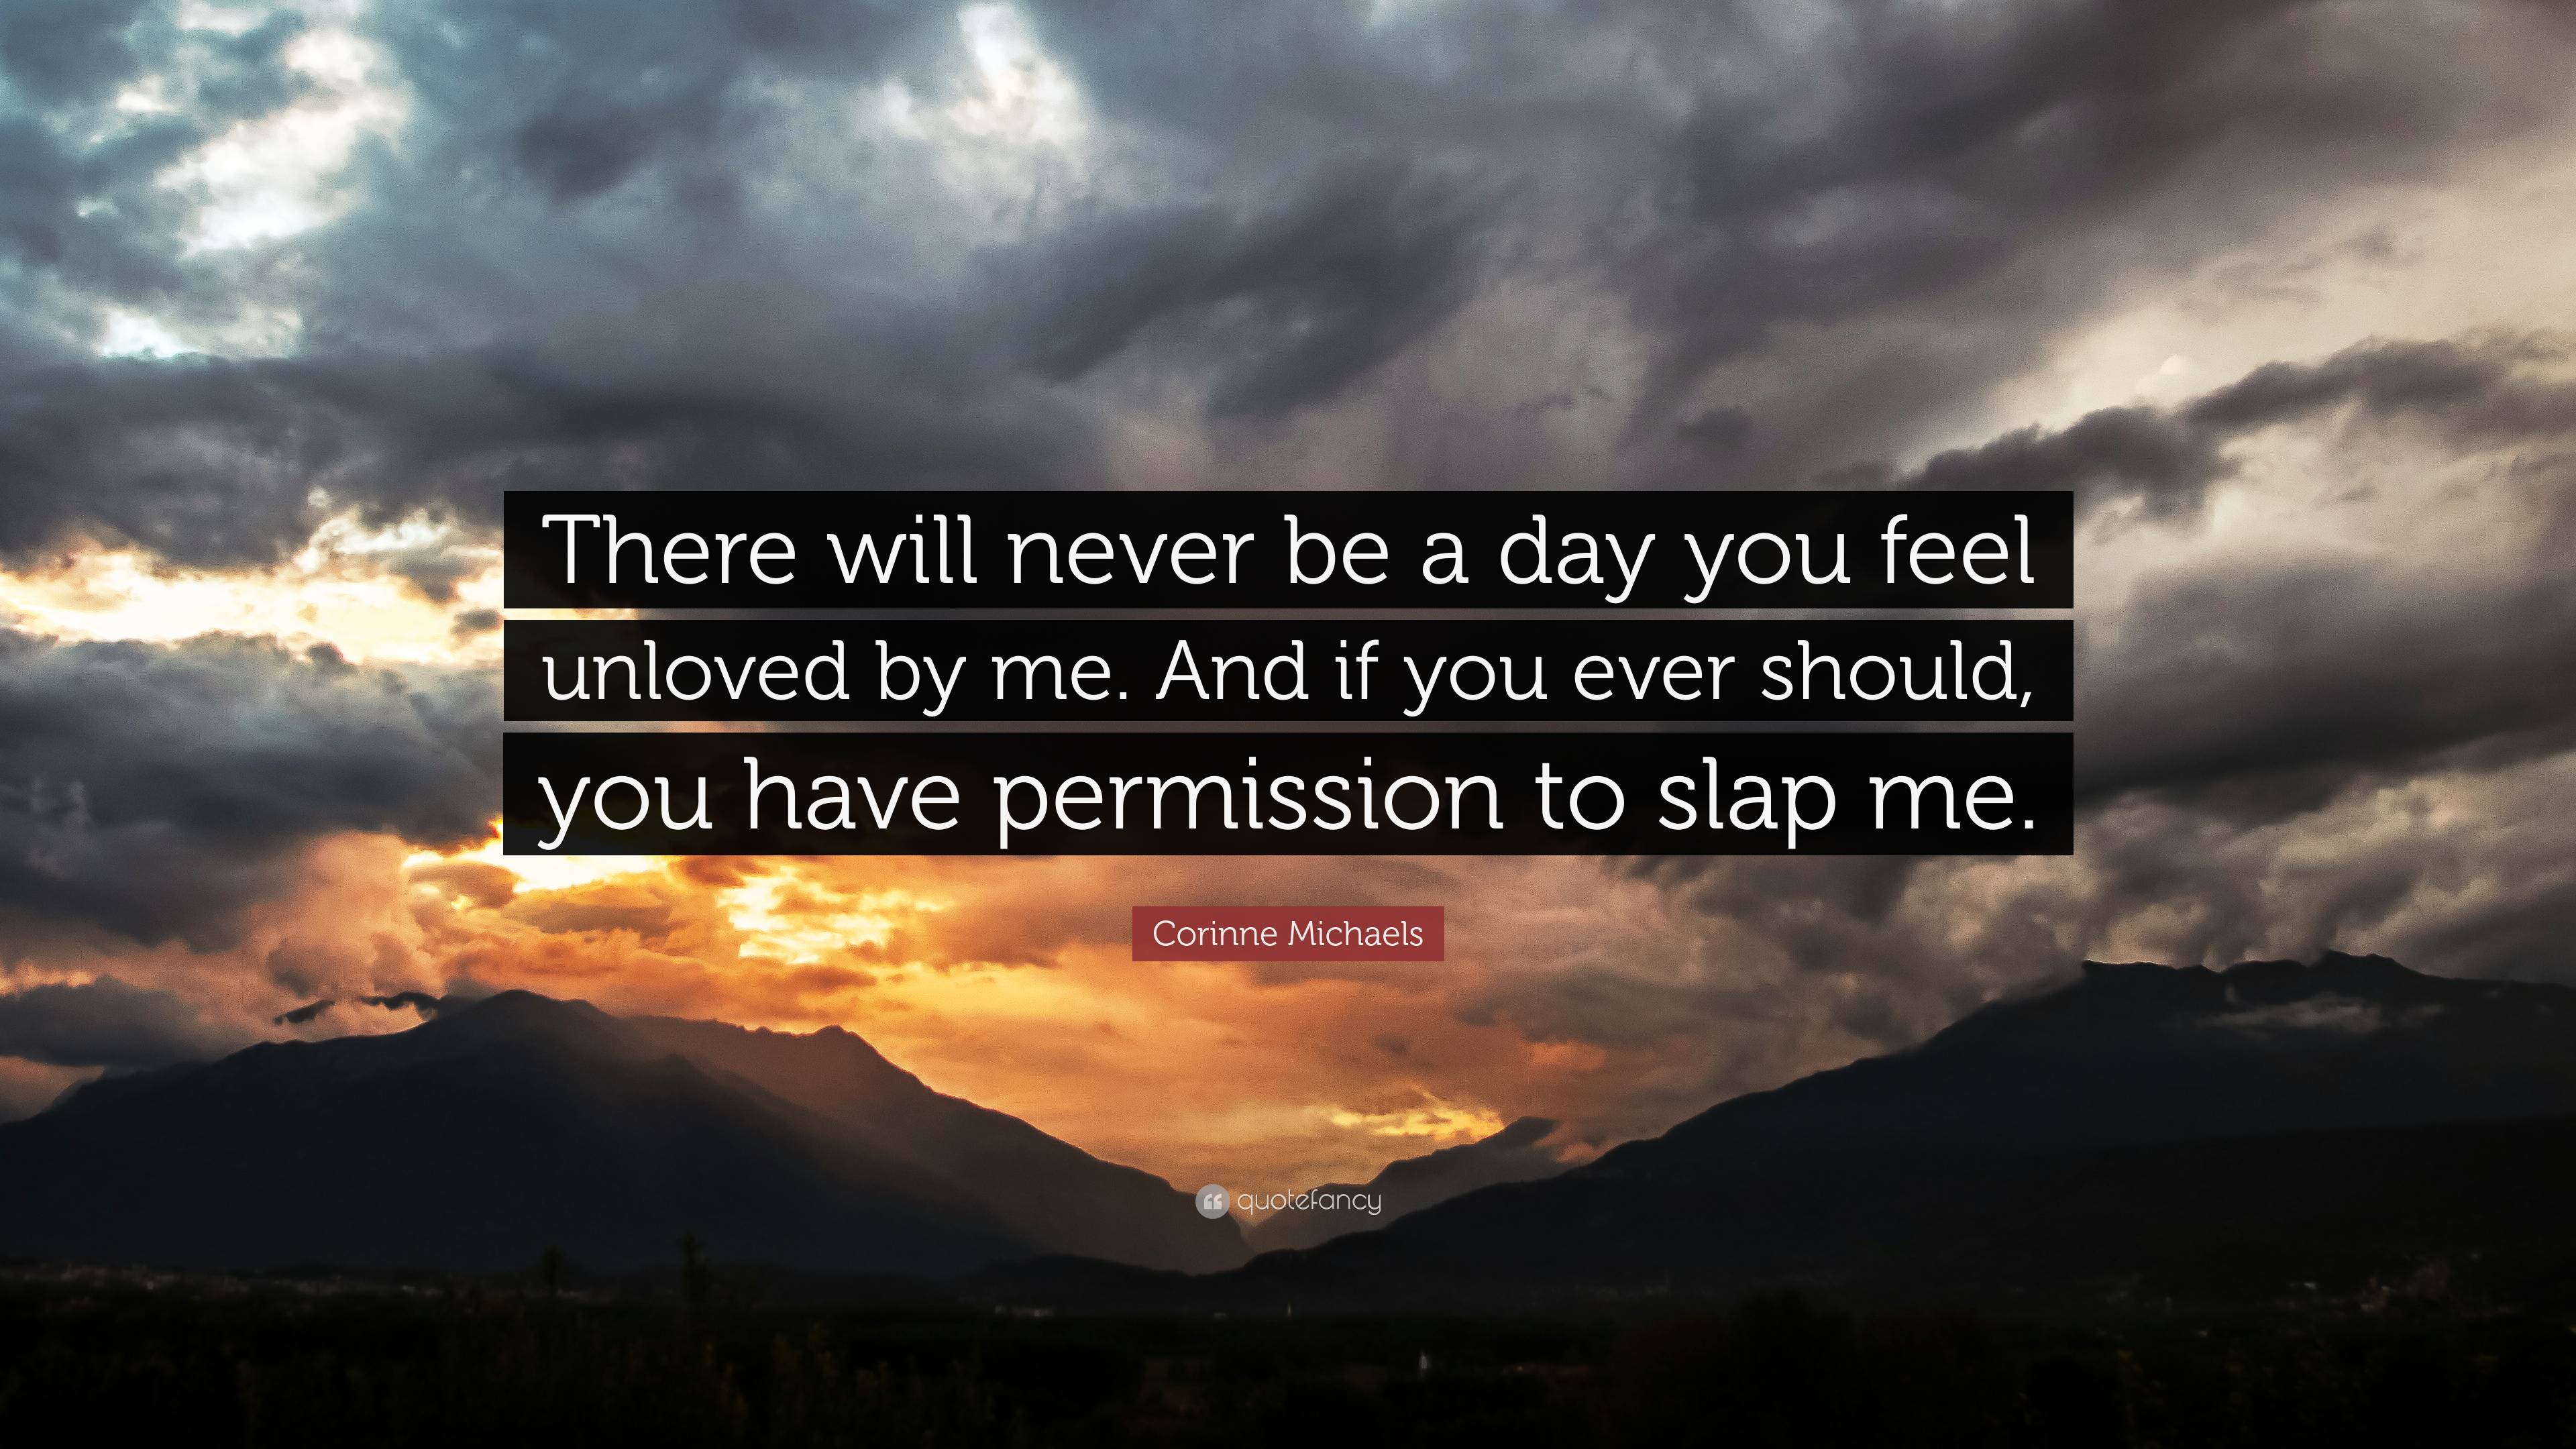 Corinne Michaels Quote: “There will never be a day you feel unloved by ...